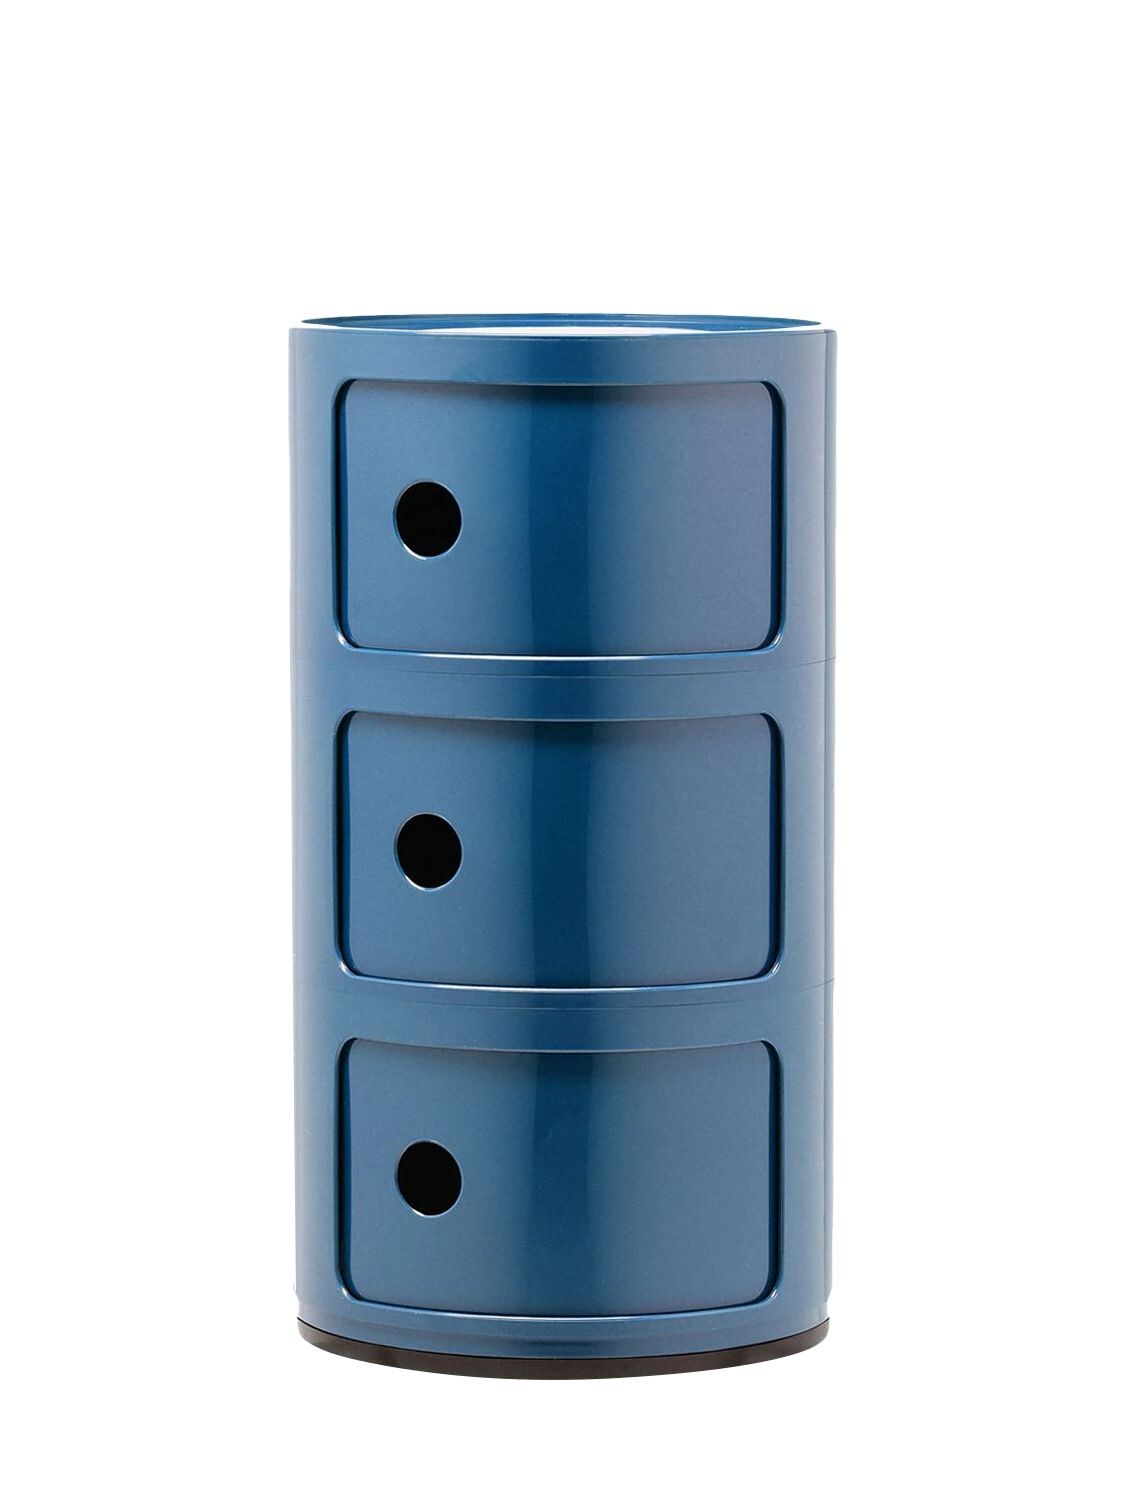 KARTELL 3-COMPARTMENT COMPONIBILI CONTAINER